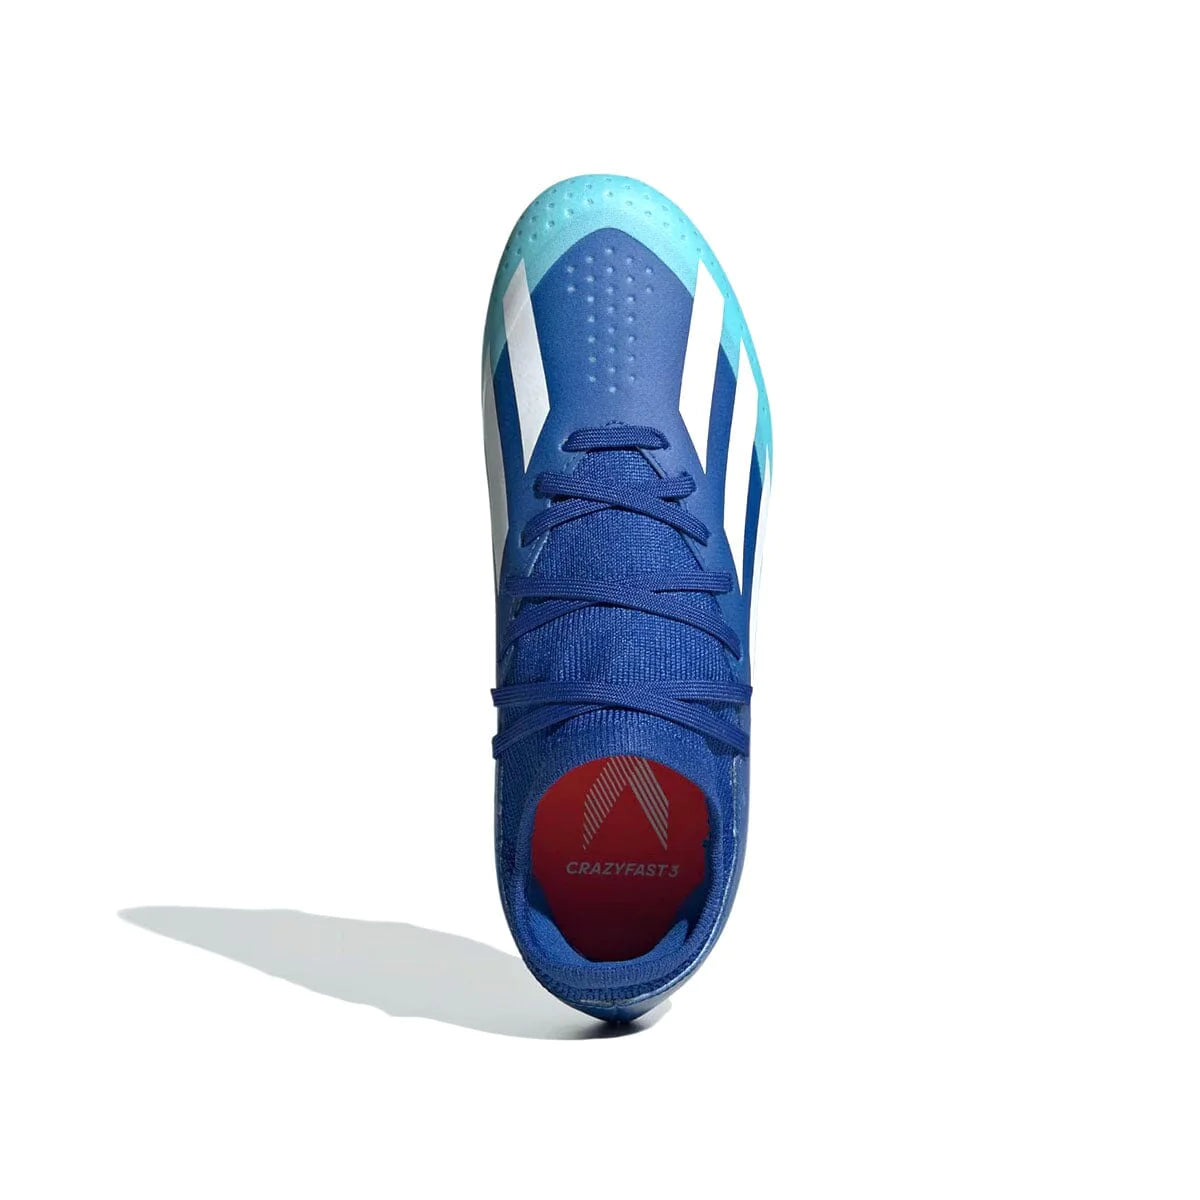 adidas X CrazyFast.3 /Solar - Ground USA – Soccer Royal/White Bright Firm ID9354 Soccer Junior Zone Red Cleat FG